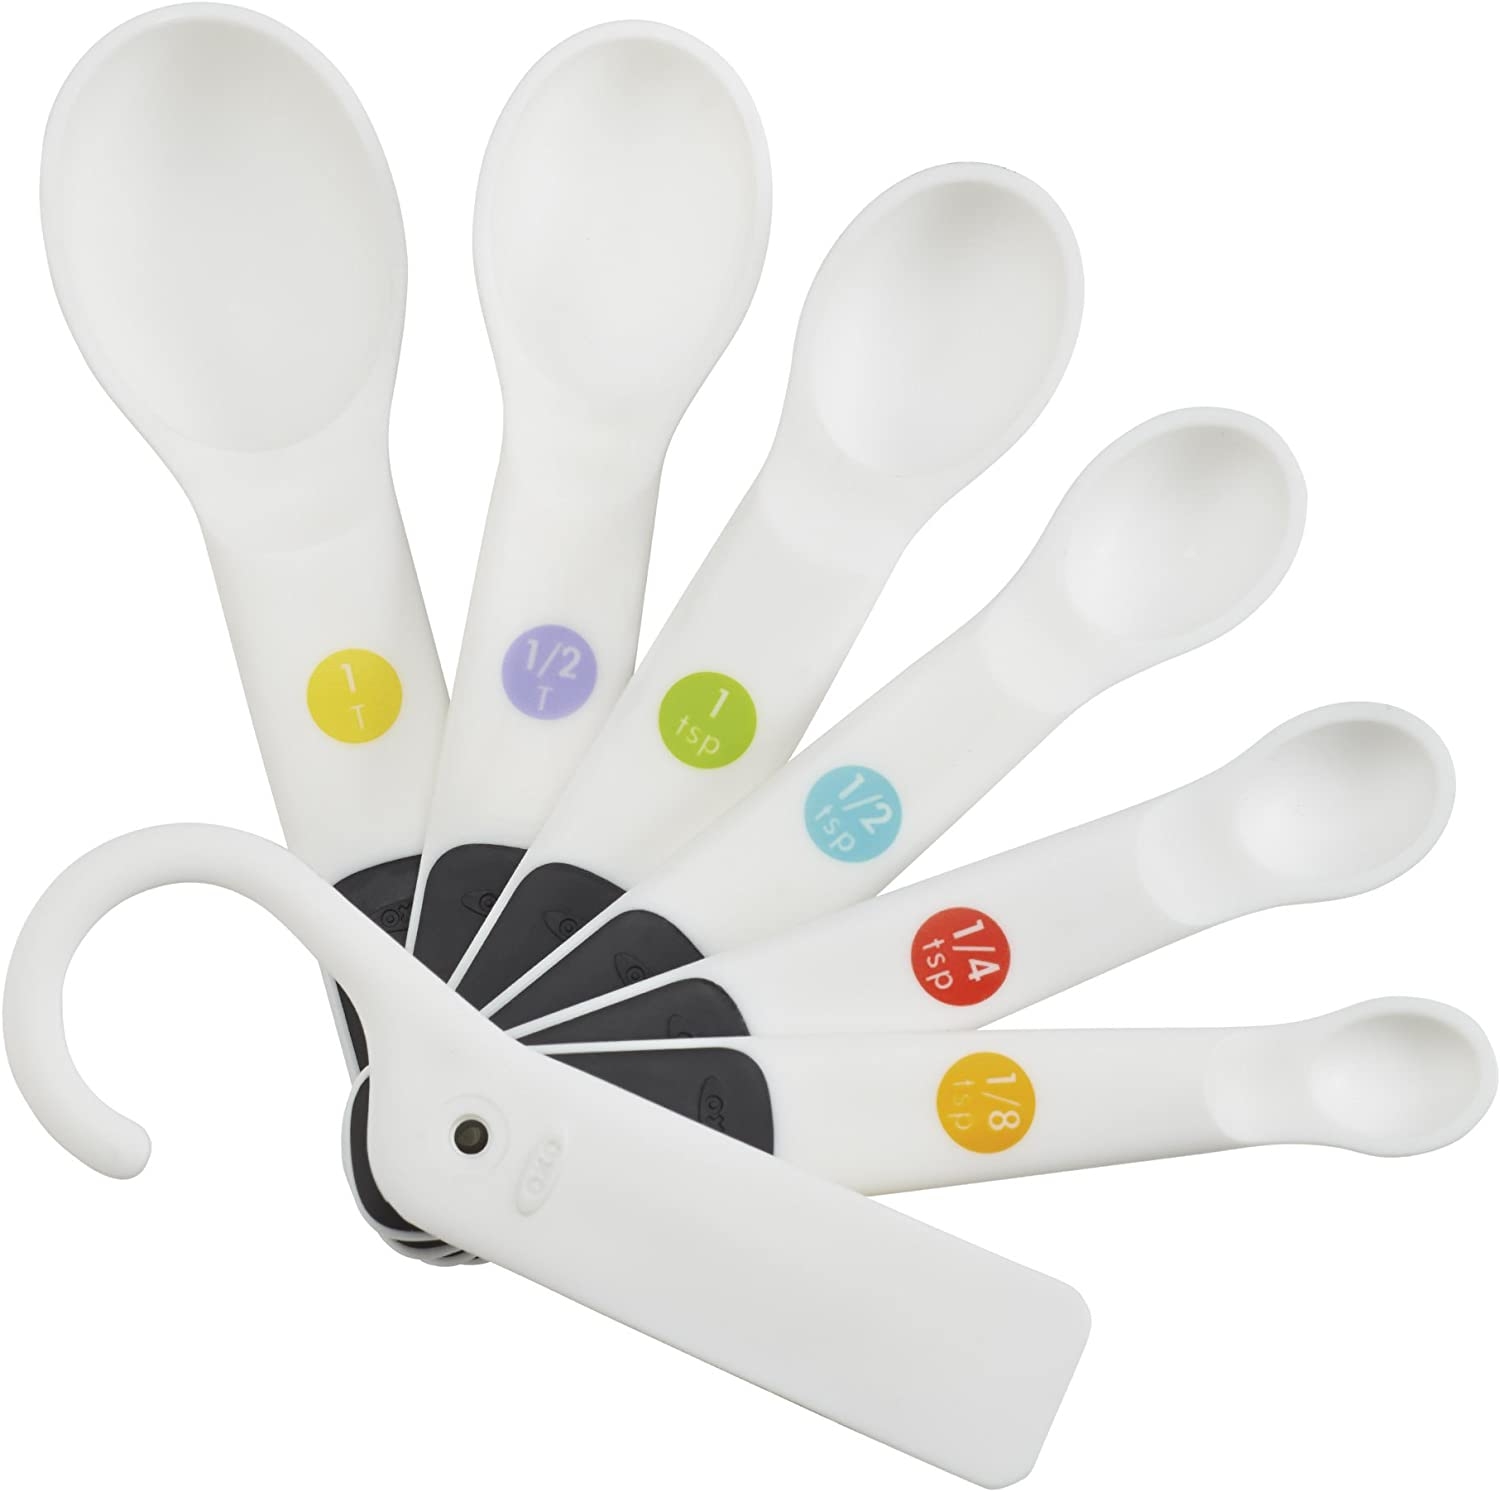 OXO 7 Piece Good Grips Measuring Spoons Set,White Import To Shop ×Product customization General Description Gallery Reviews